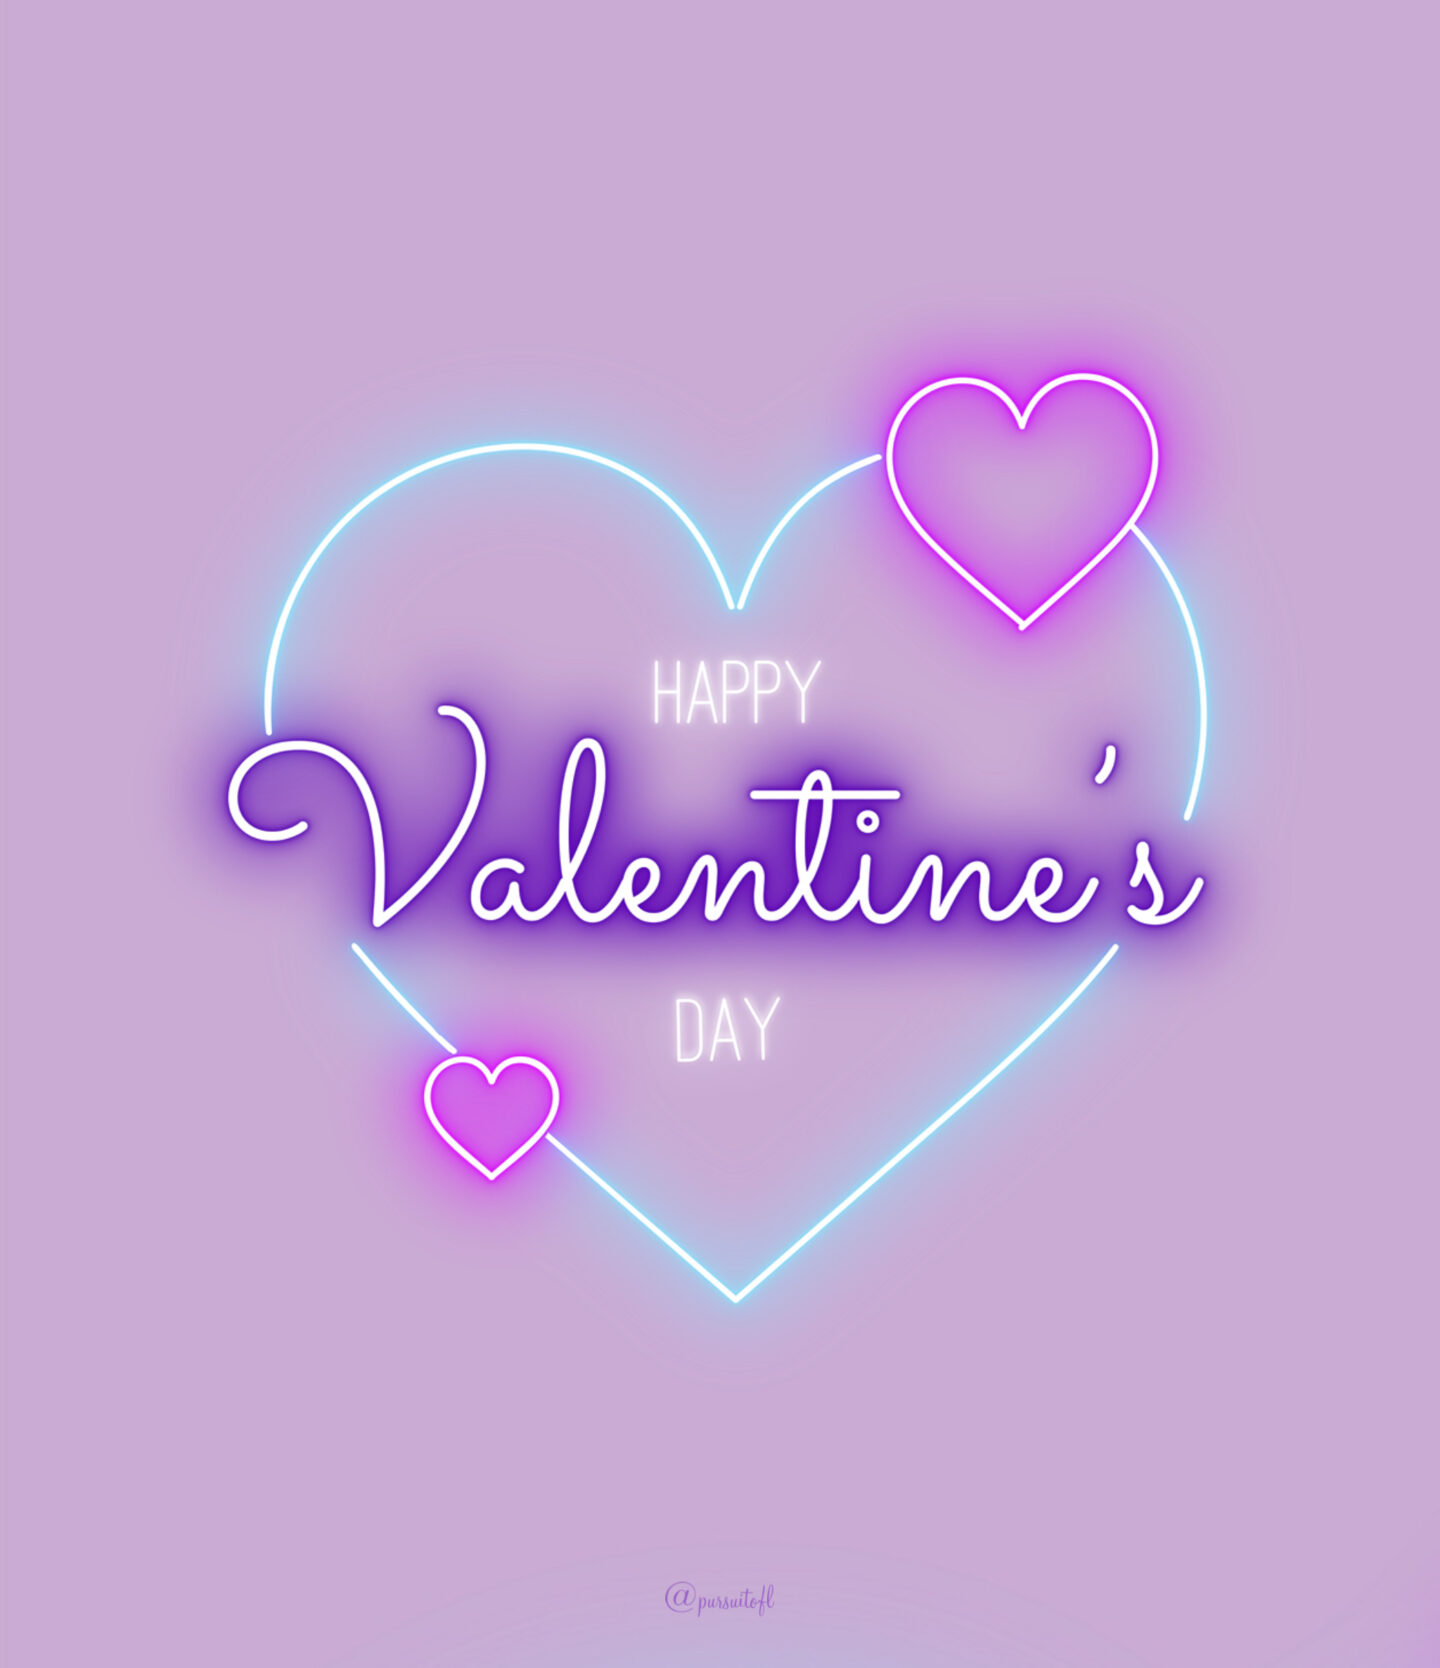 Purple Tablet Wallpaper with Happy Valentine's Day text and hearts; Valentine's Day Wallpaper